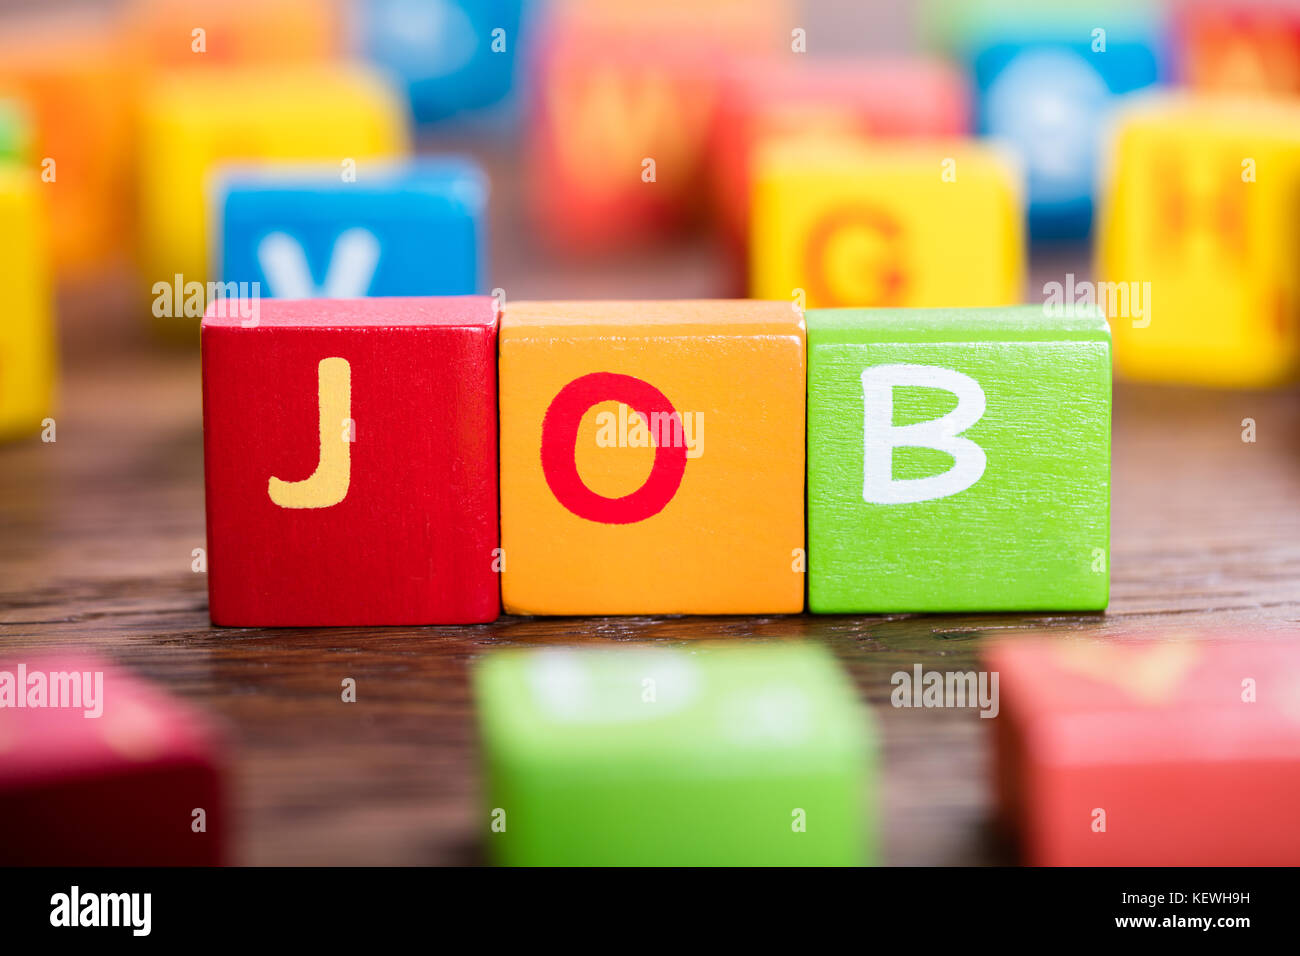 Close-up Of A Job Word On Colorful Blocks At Wooden Desk Stock Photo